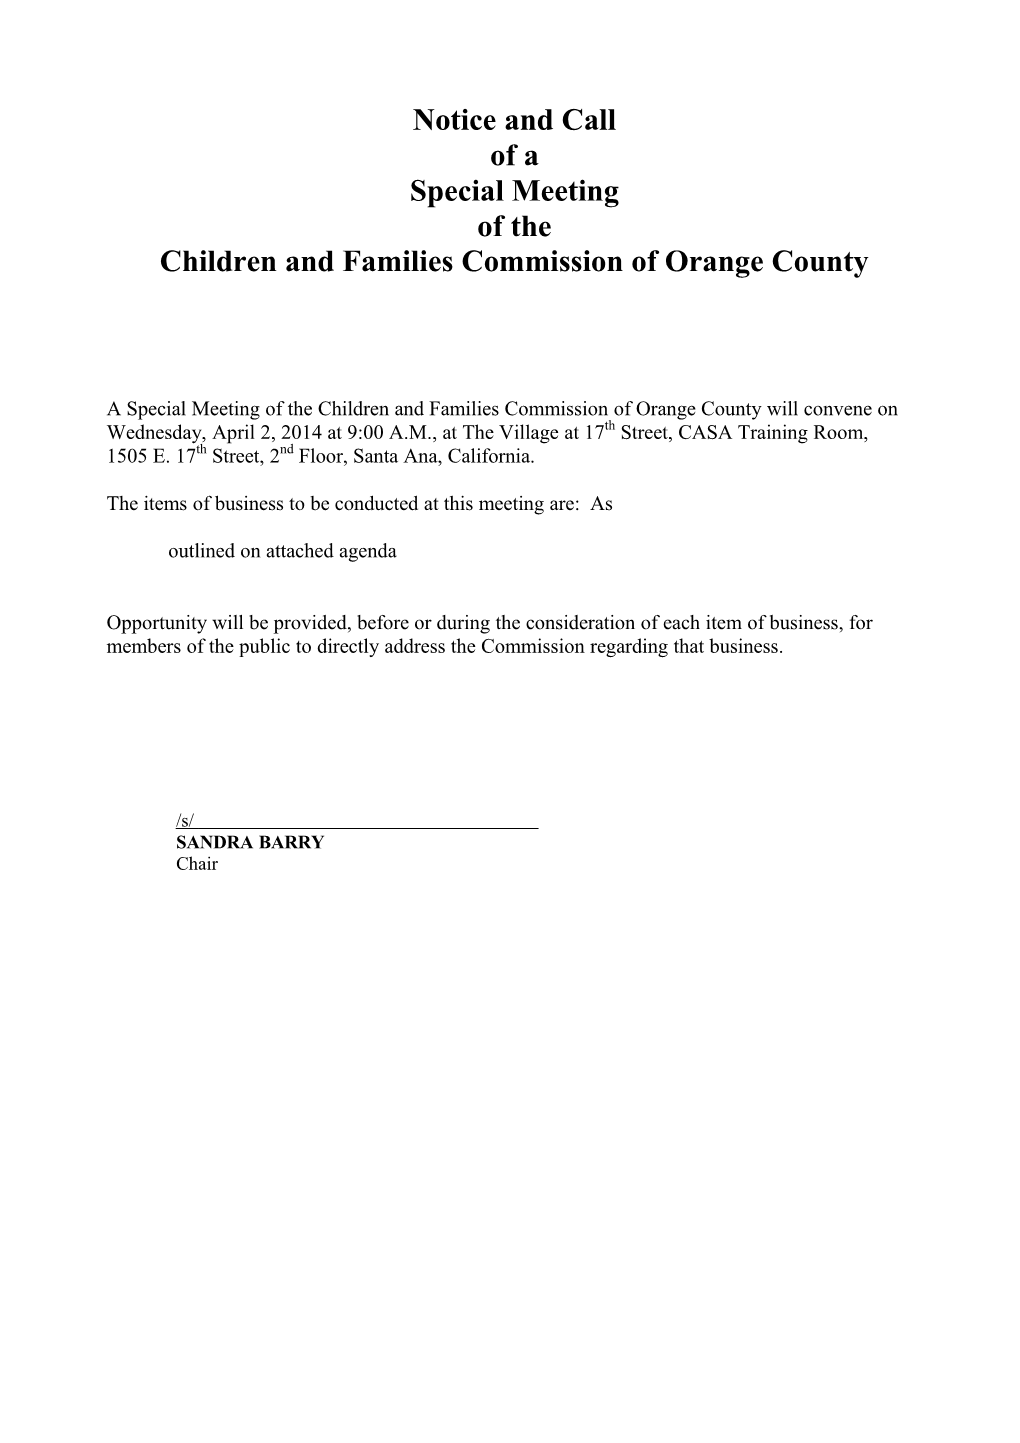 Children and Families Commission of Orange County